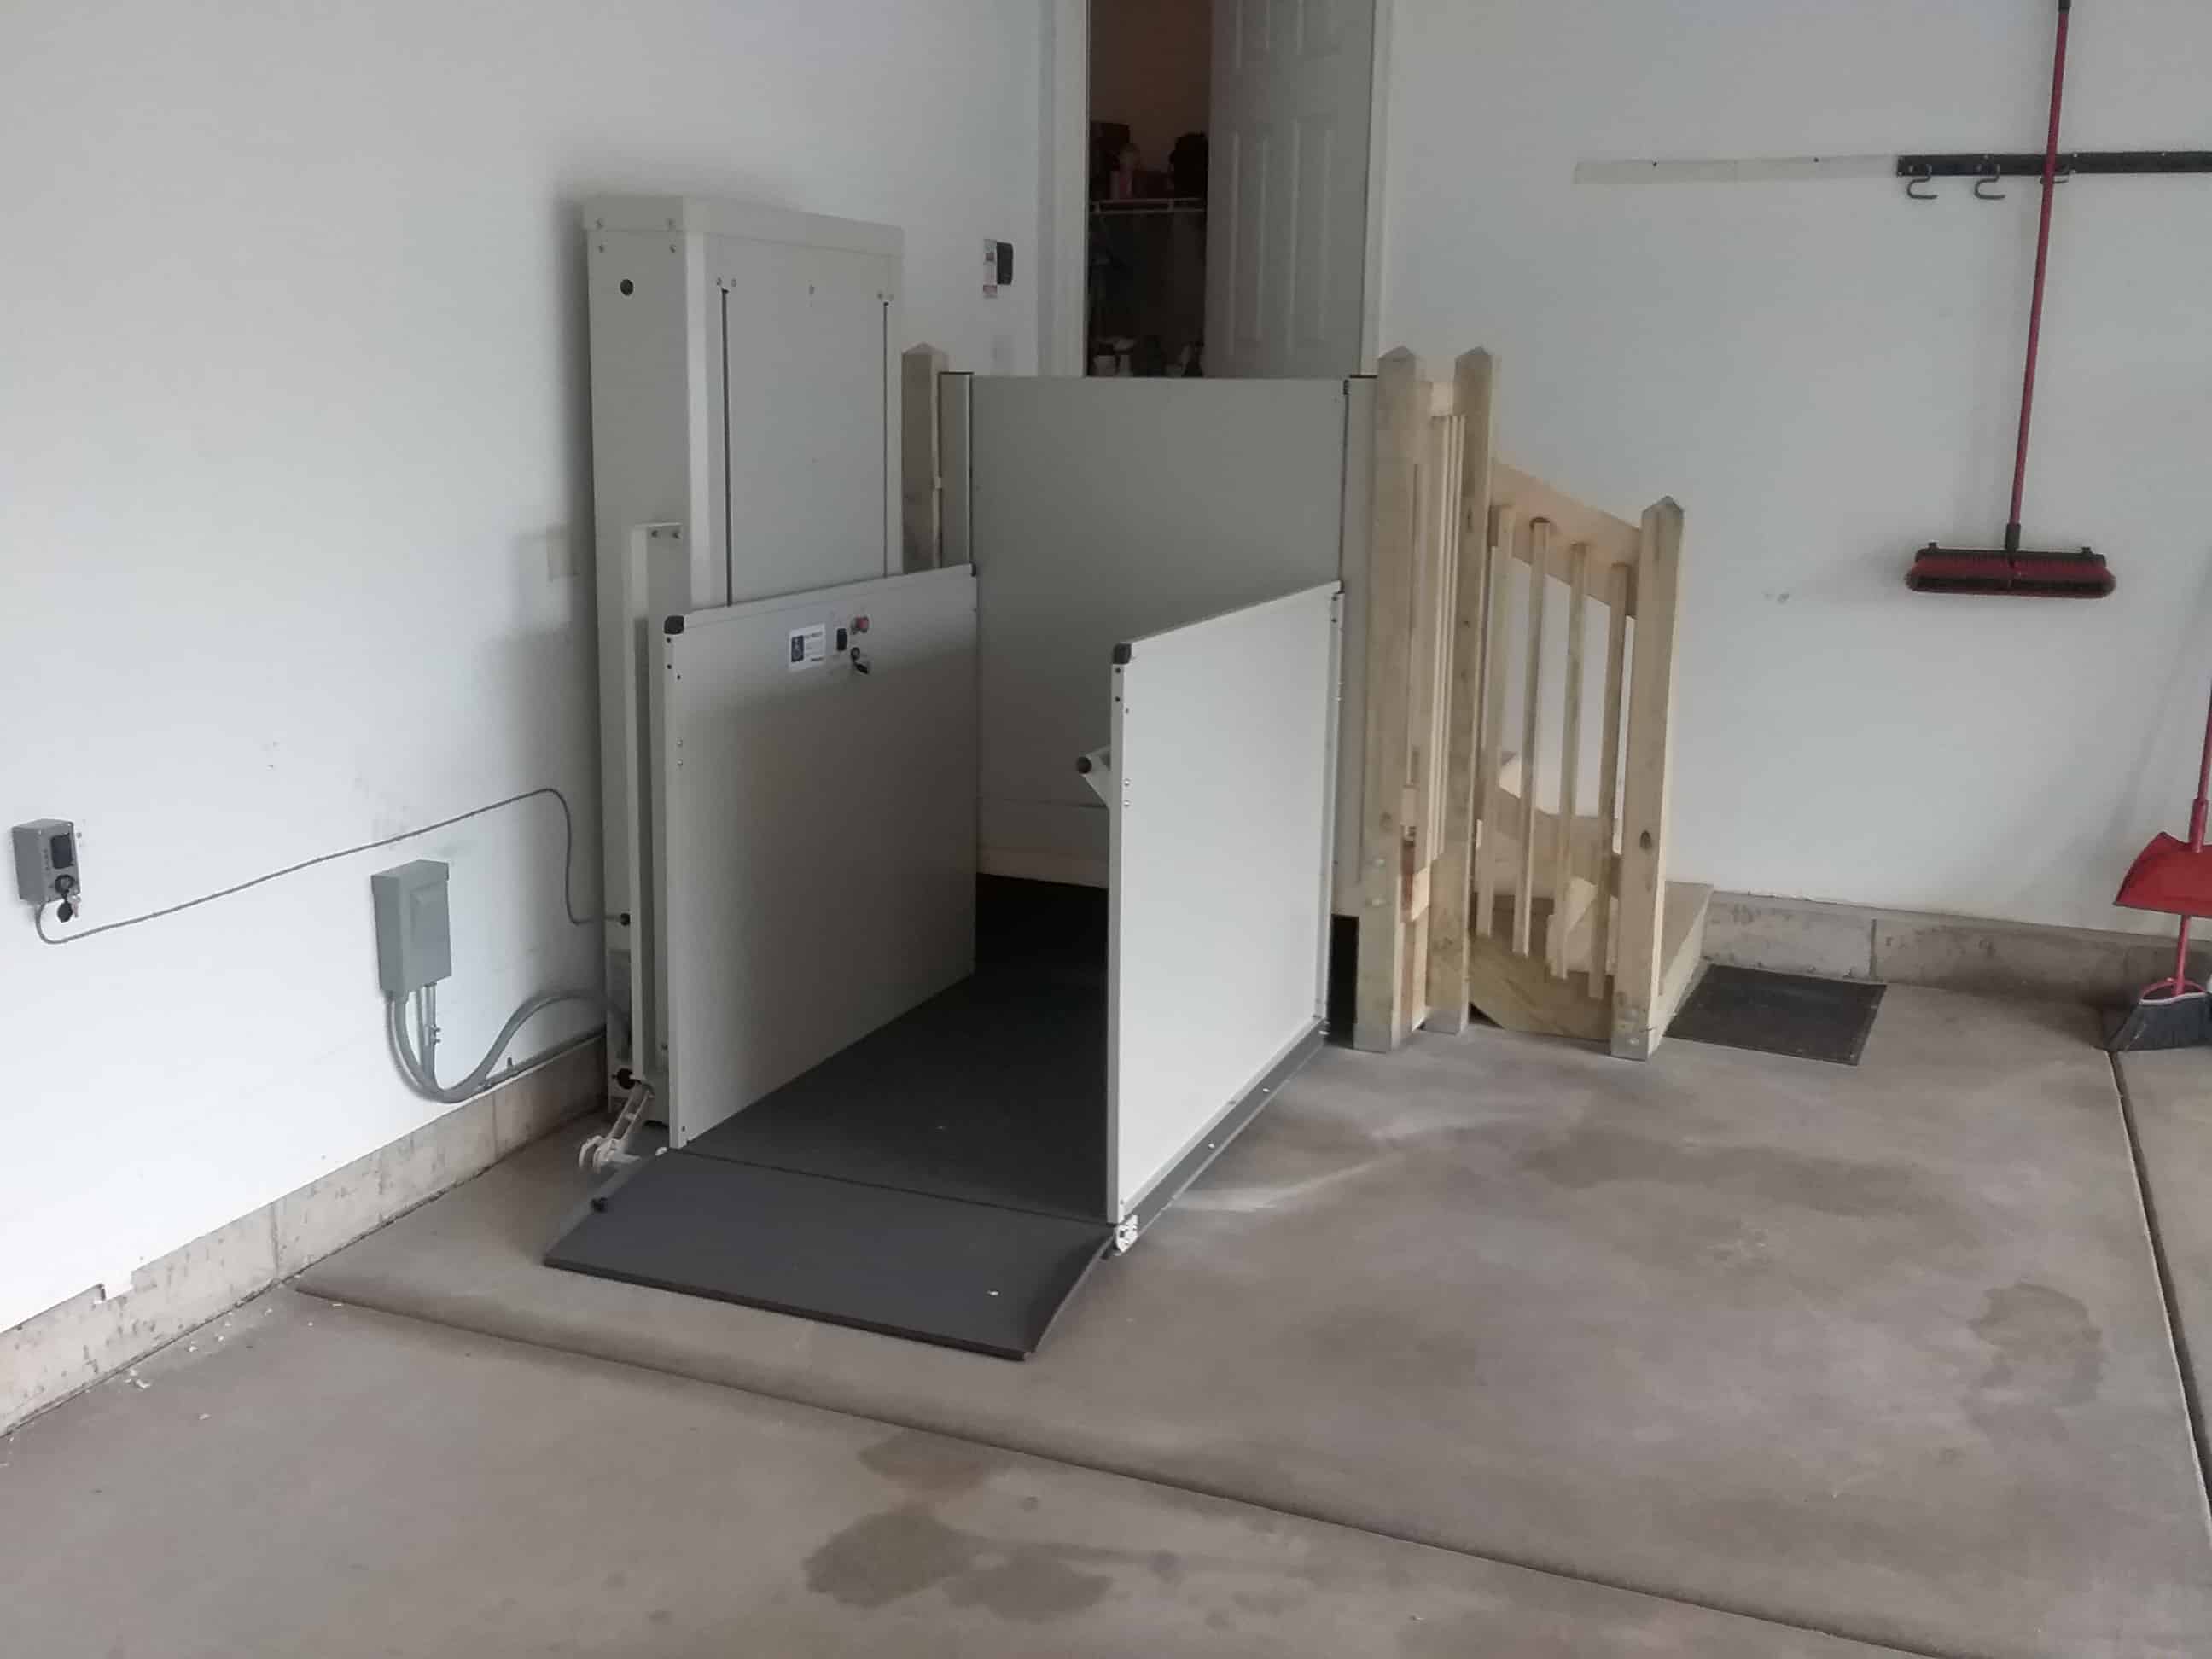 wheelchair lift installed in garage to provide access to home entrance in Woodstock, IL